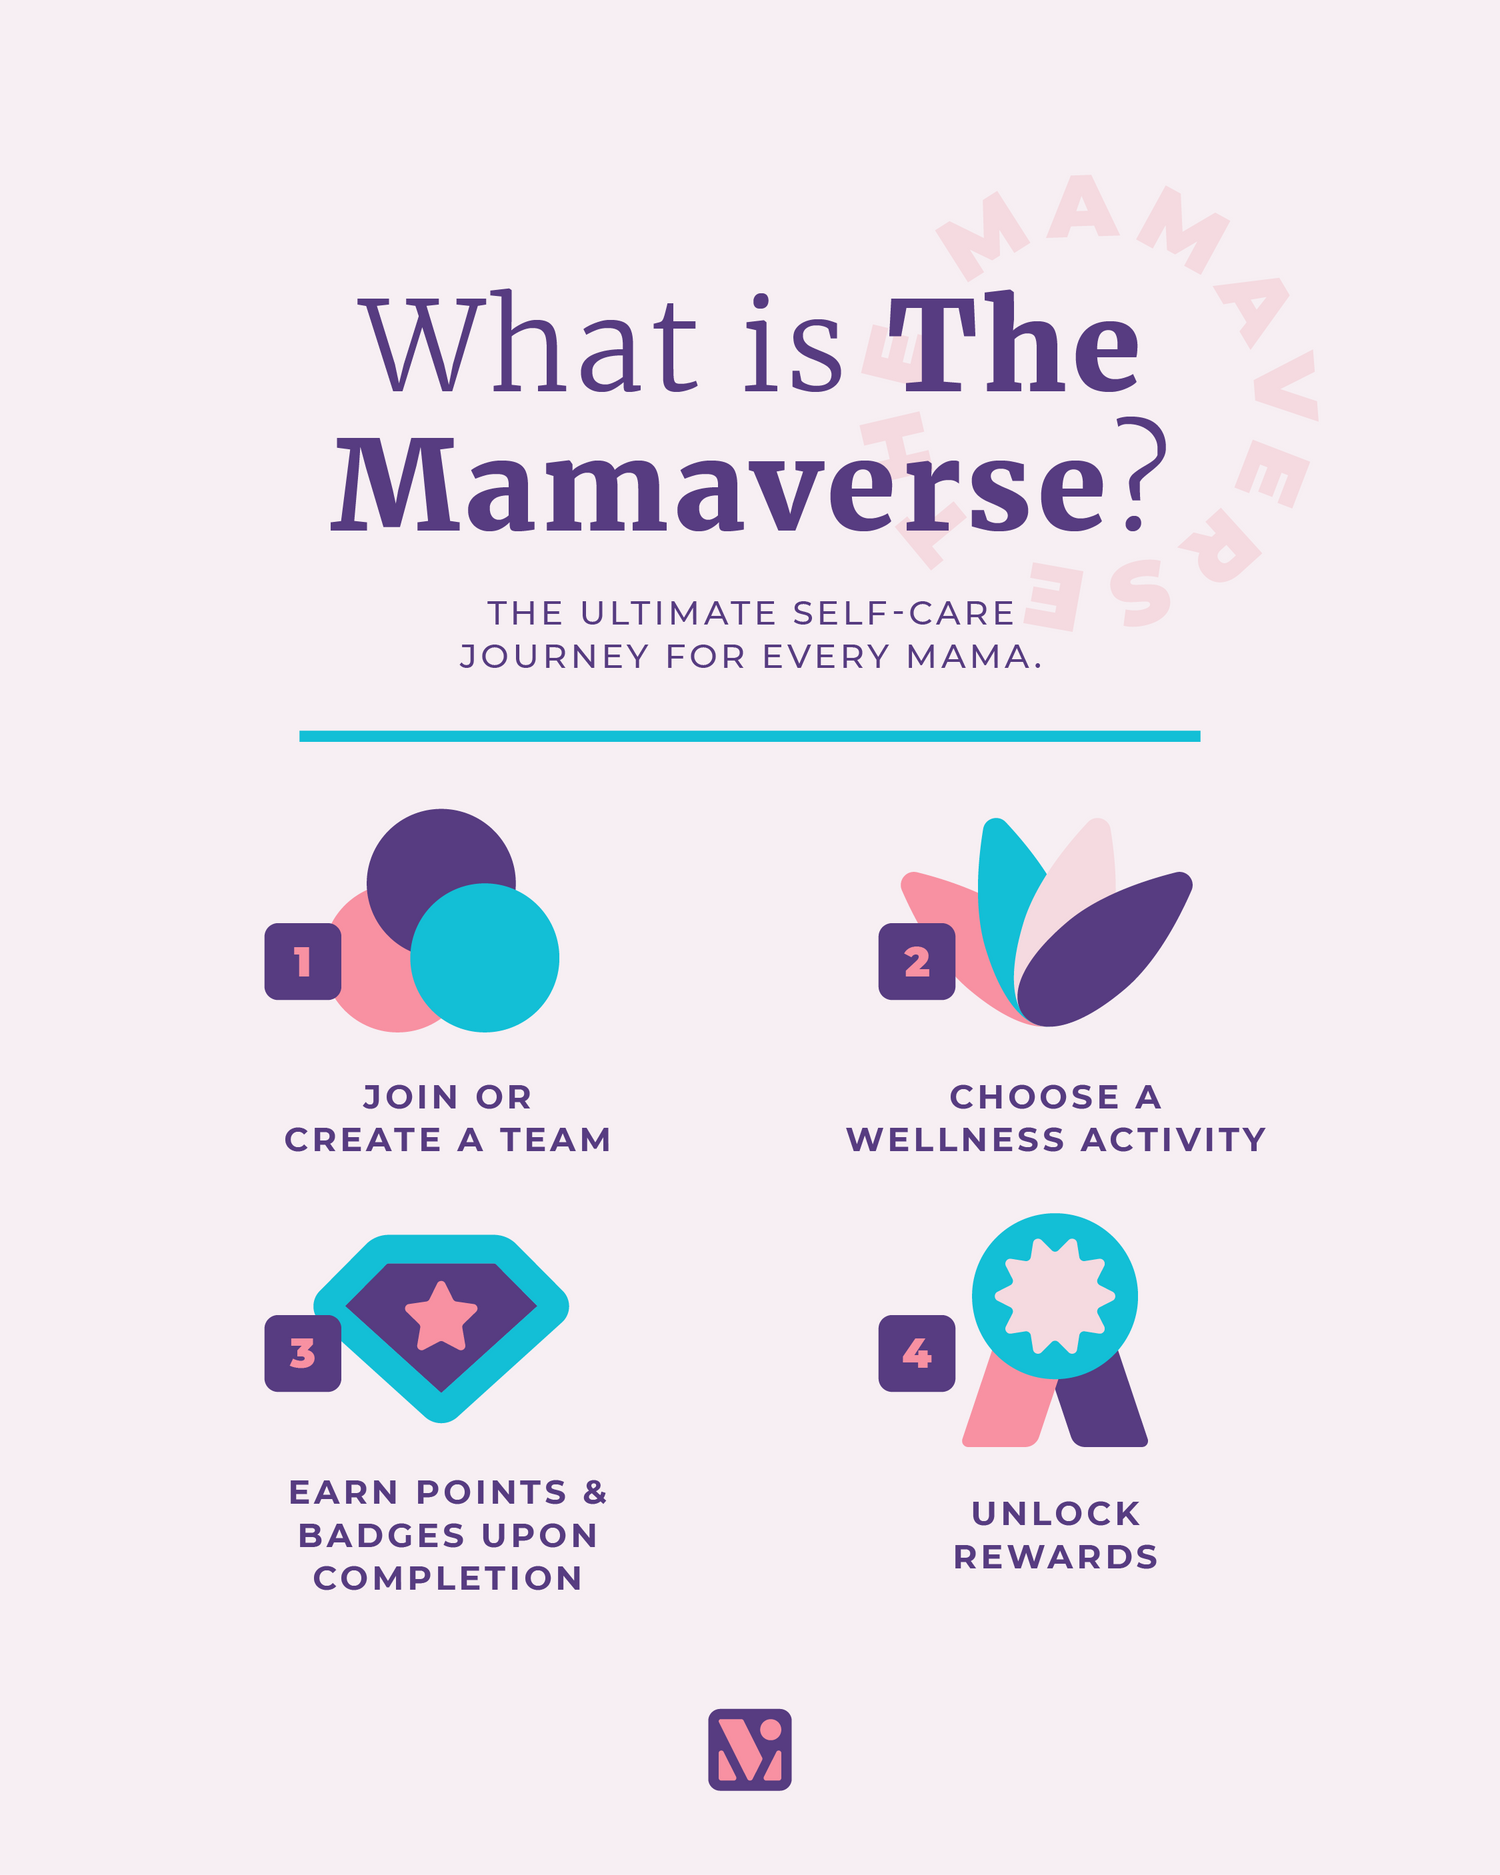 What is The Mamaverse? Learn about the interactive online self-care community for moms here.